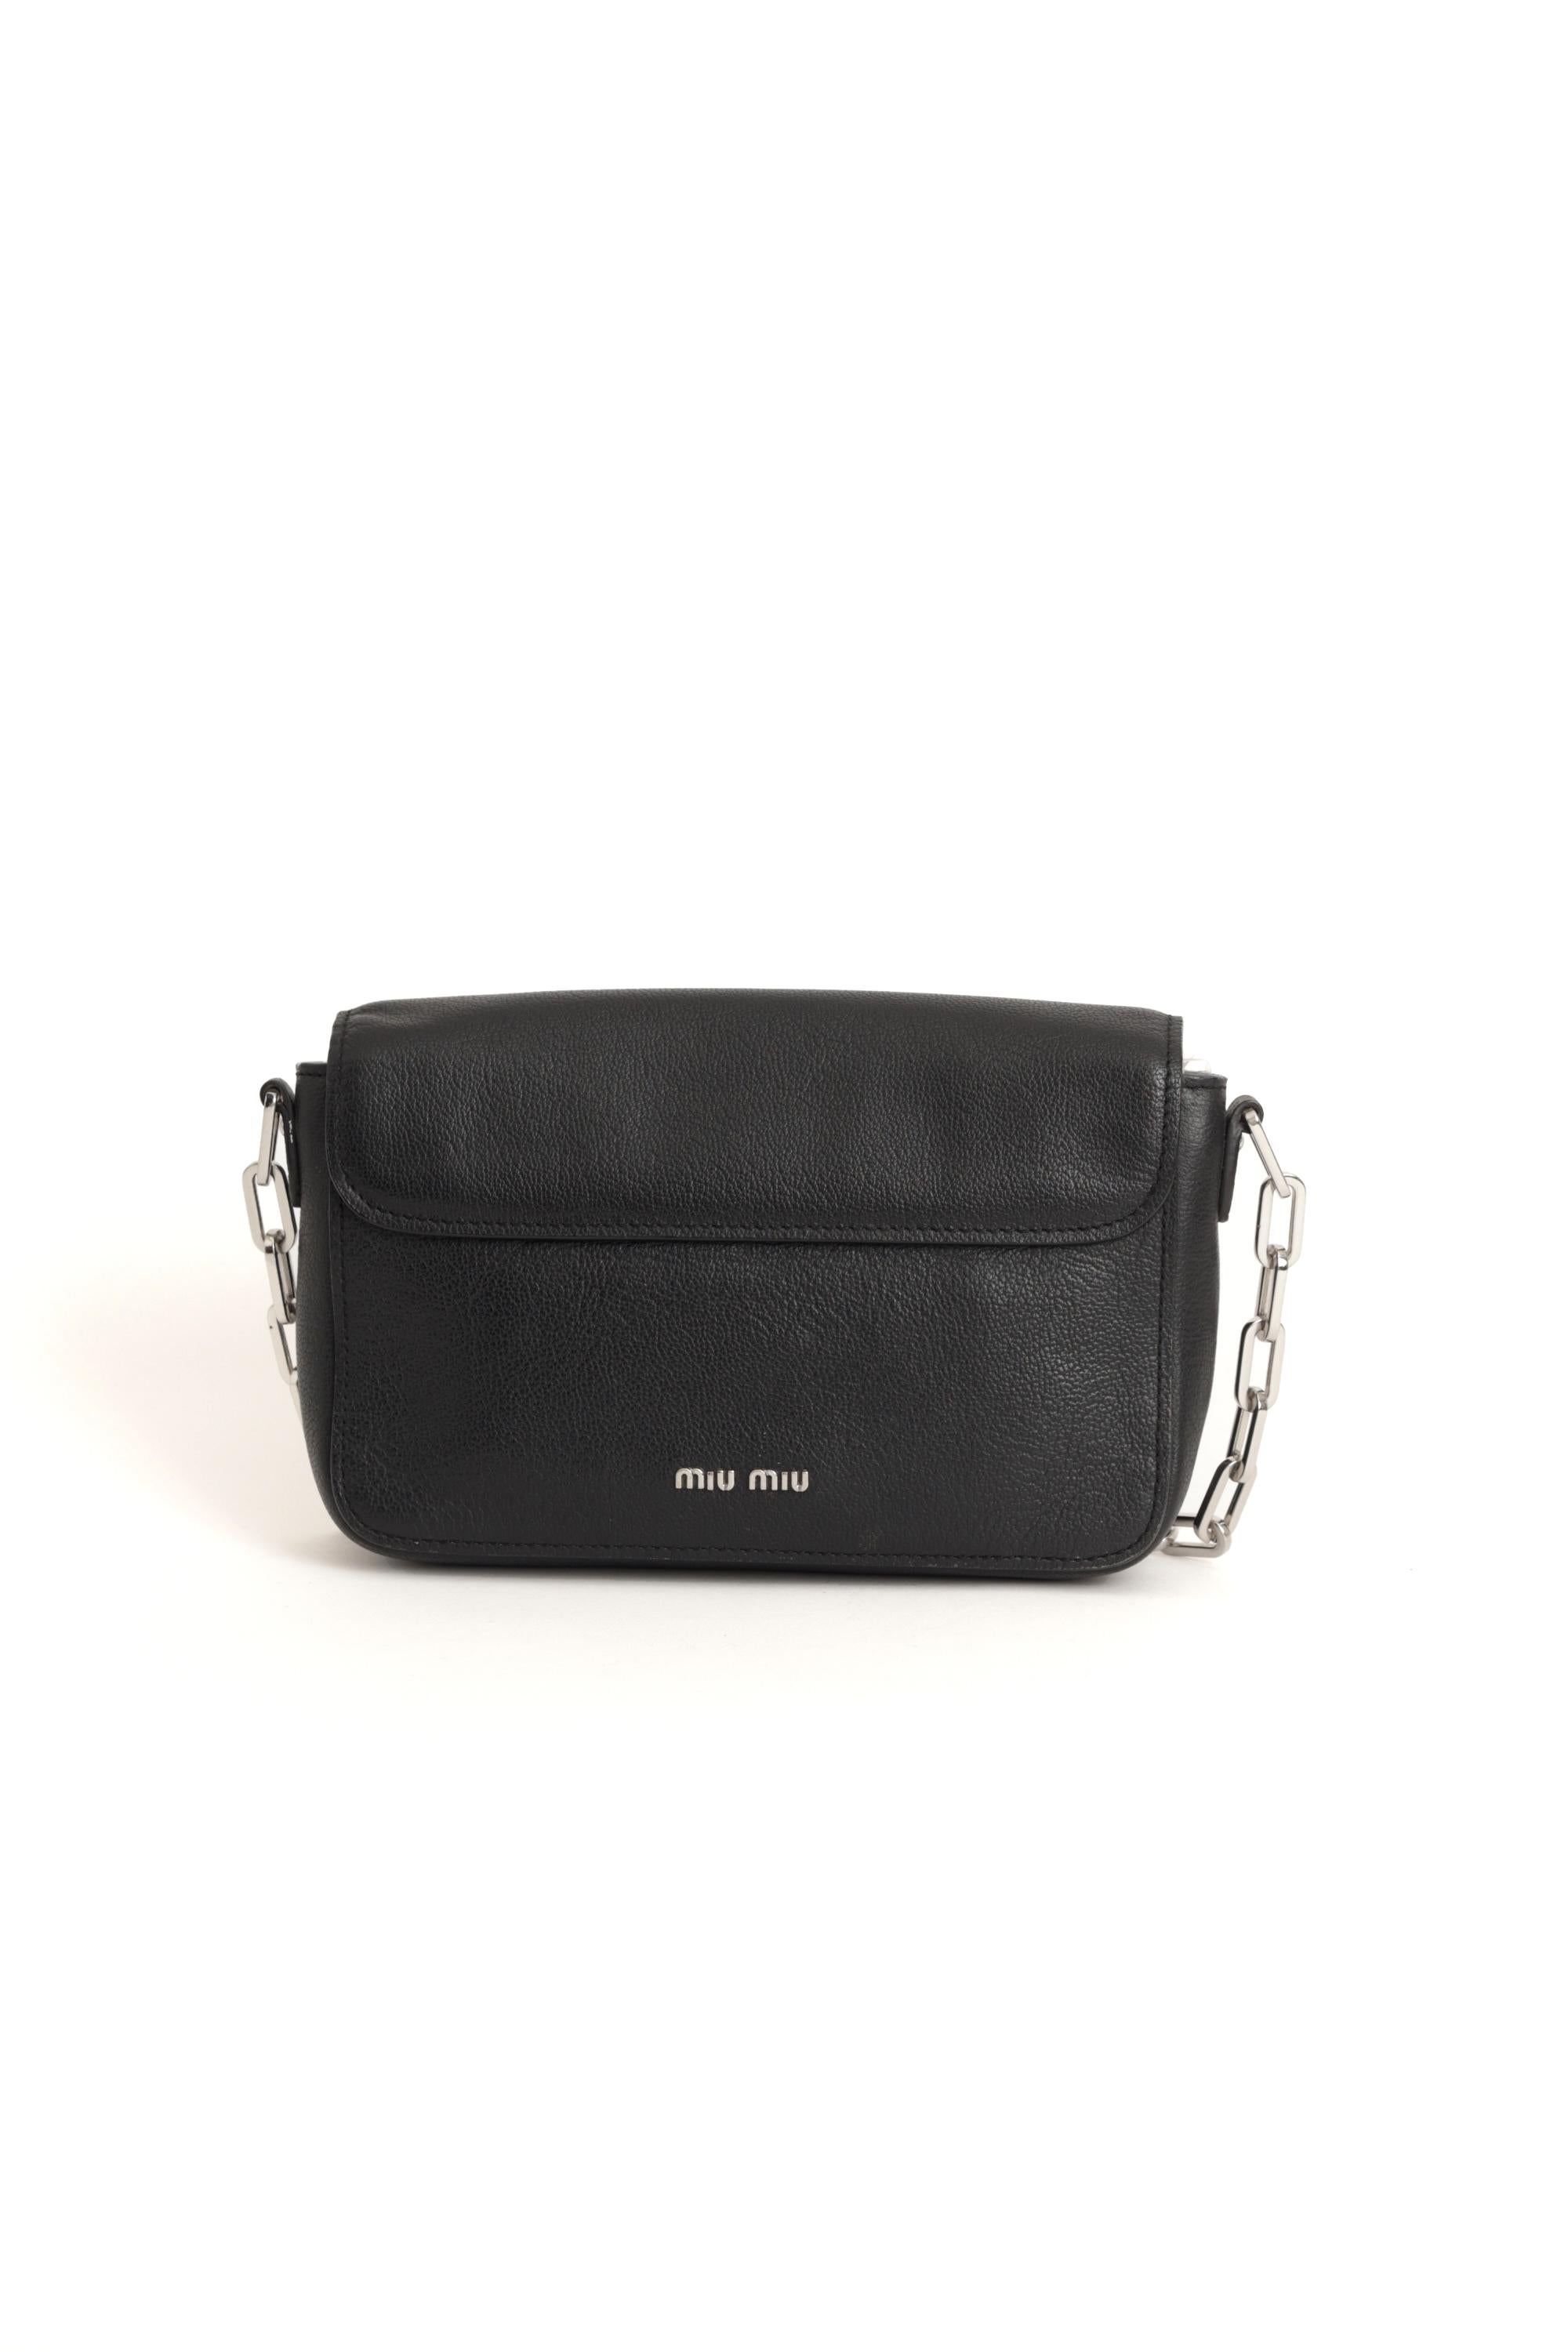 We are excited to present this Miu Miu 2000’s black leather single flap crossbody bag. Features silver chain strap, two compartments, push-lock clasp and inside zip pocket. In excellent condition. Authenticity guaranteed.

Crossbody bag
Fabric: